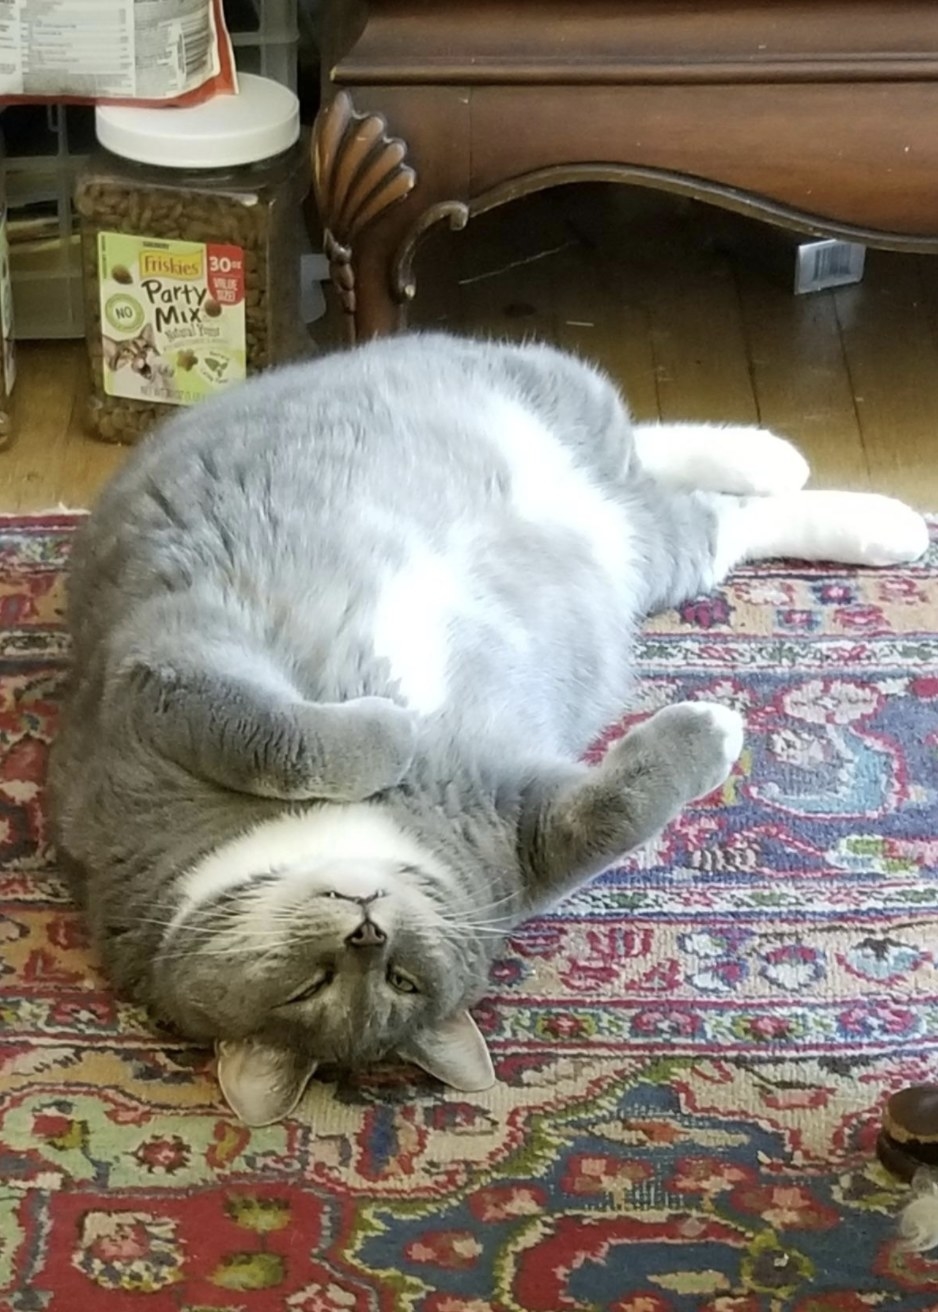 A grey and white chunky cat is lying belly up on a rug next to a container of party mix all-natural cat treats